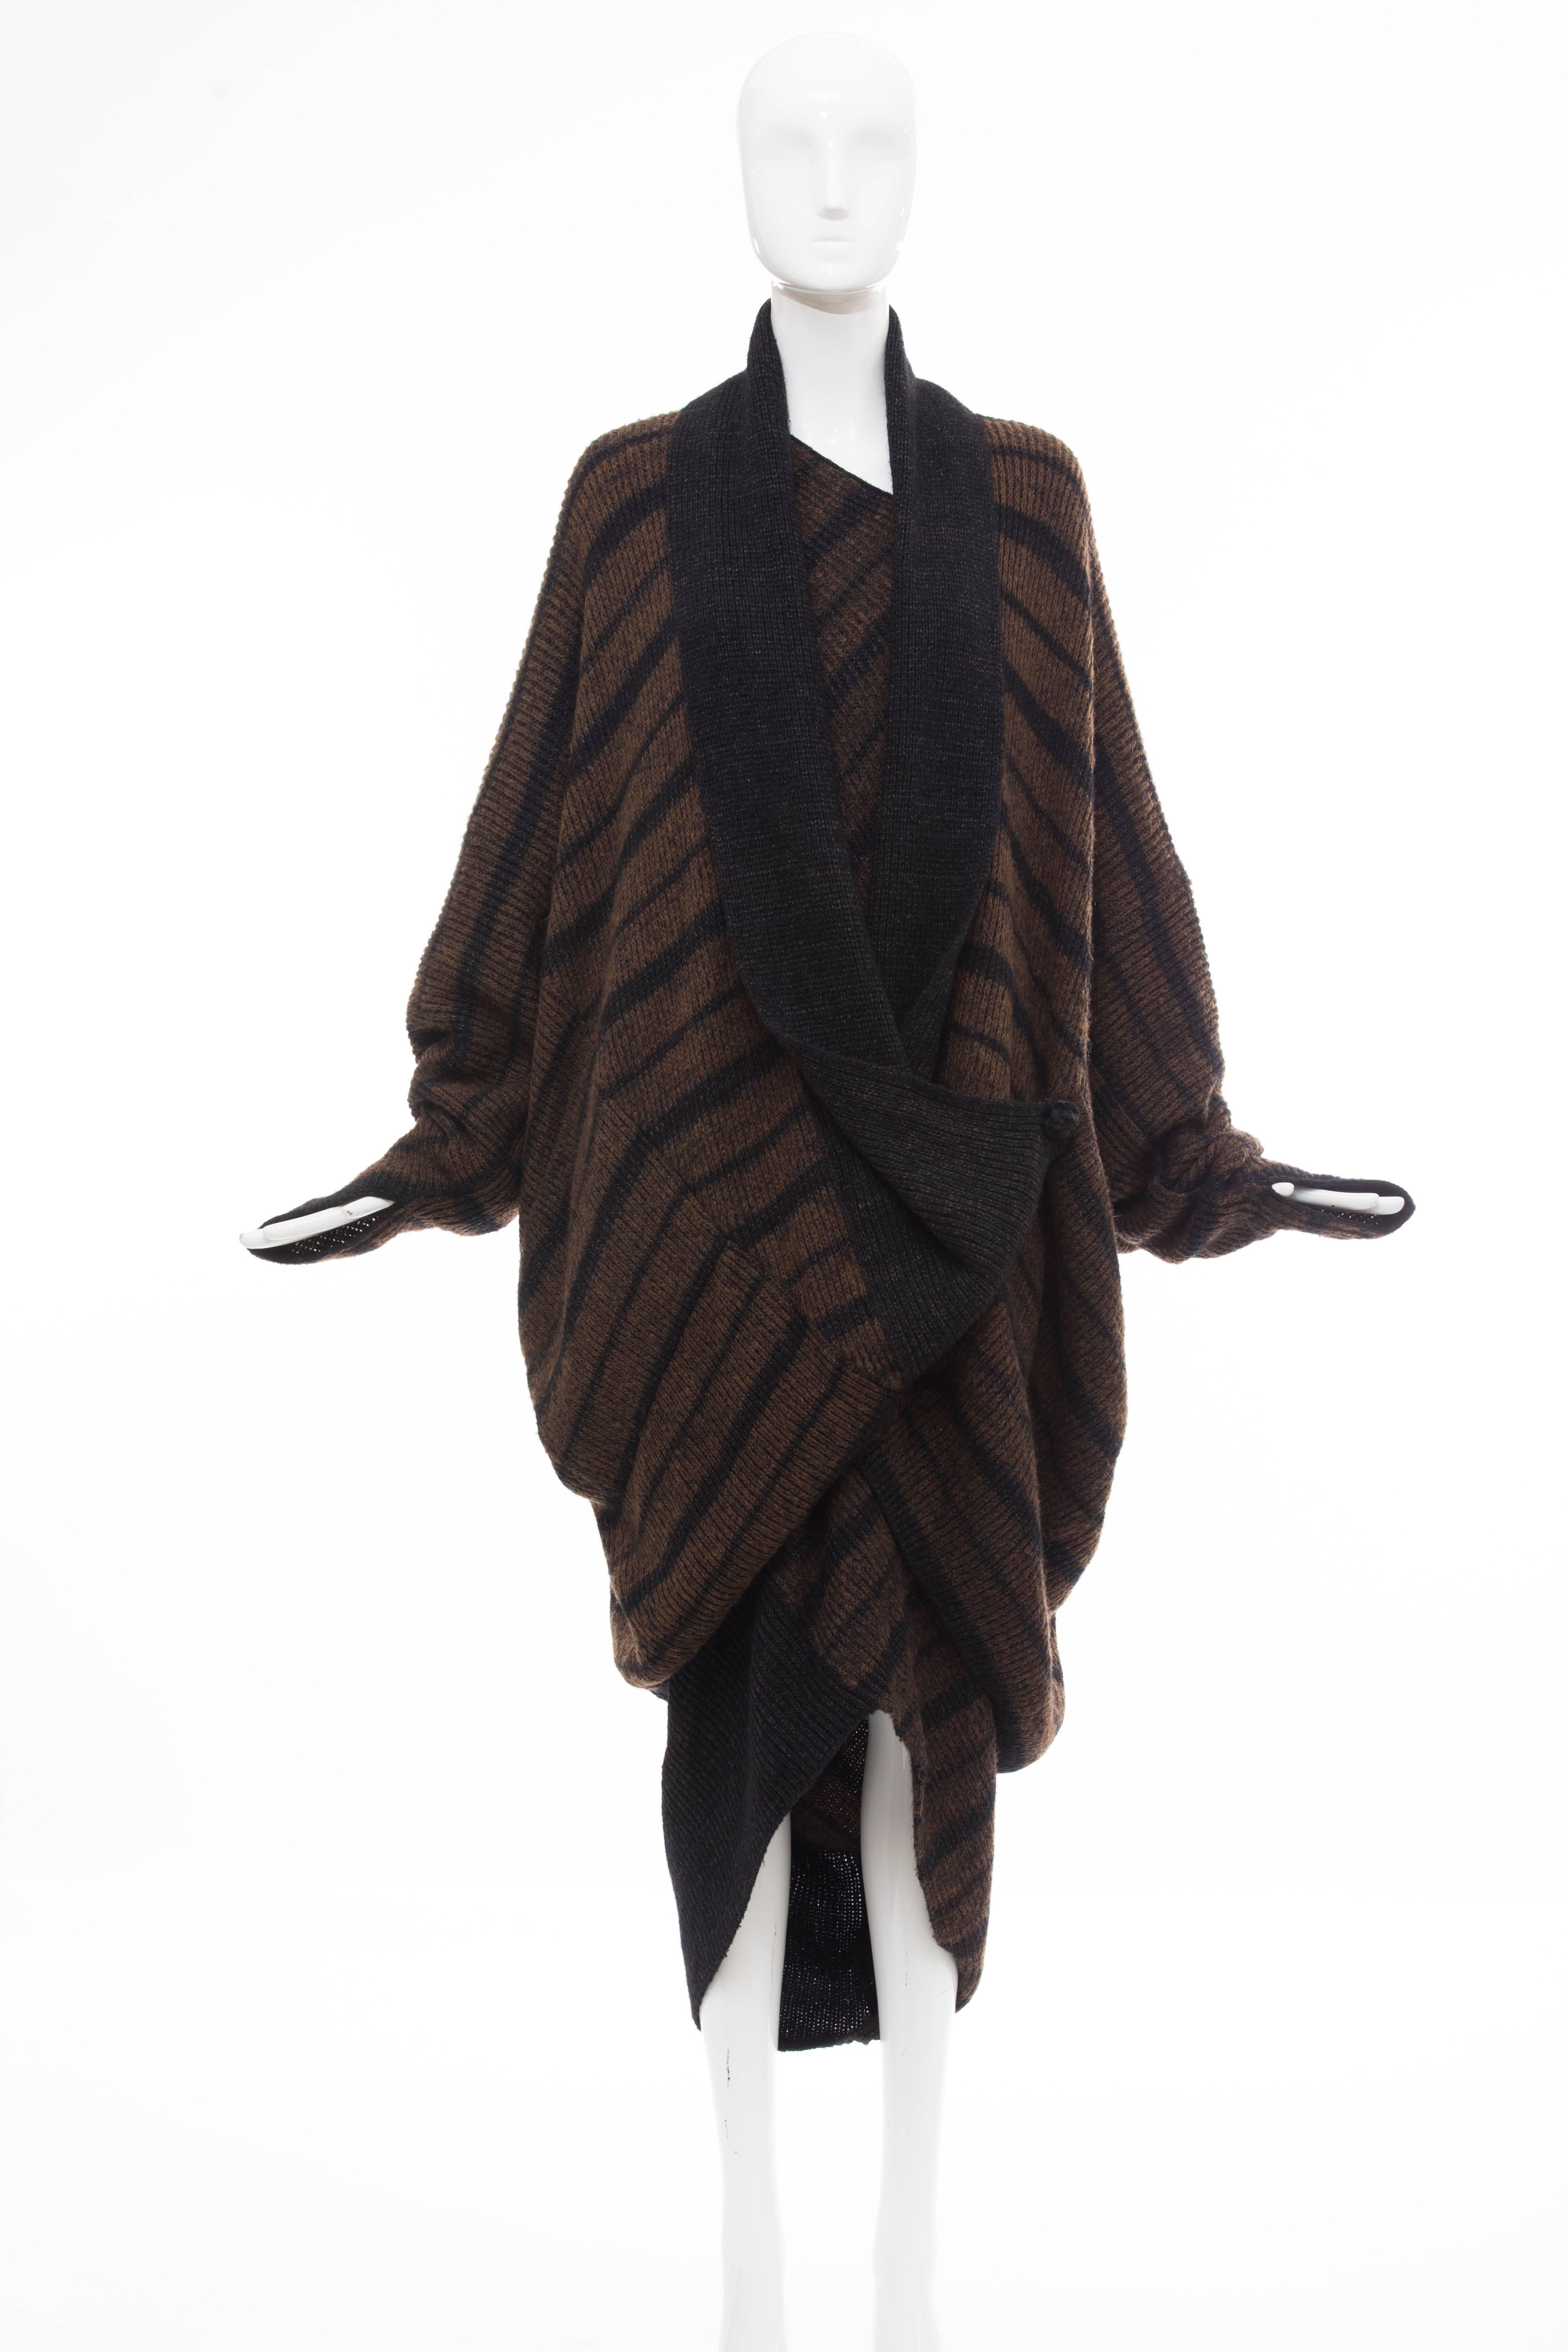 Issey Miyake, Circa 1970's sweater dress and cocoon cardigan ensemble. Wool long sleeve sweater dress with geometric neckline, striped pattern, tapered hem and tonal stitching throughout with long sleeve cocoon cardigan with striped pattern,